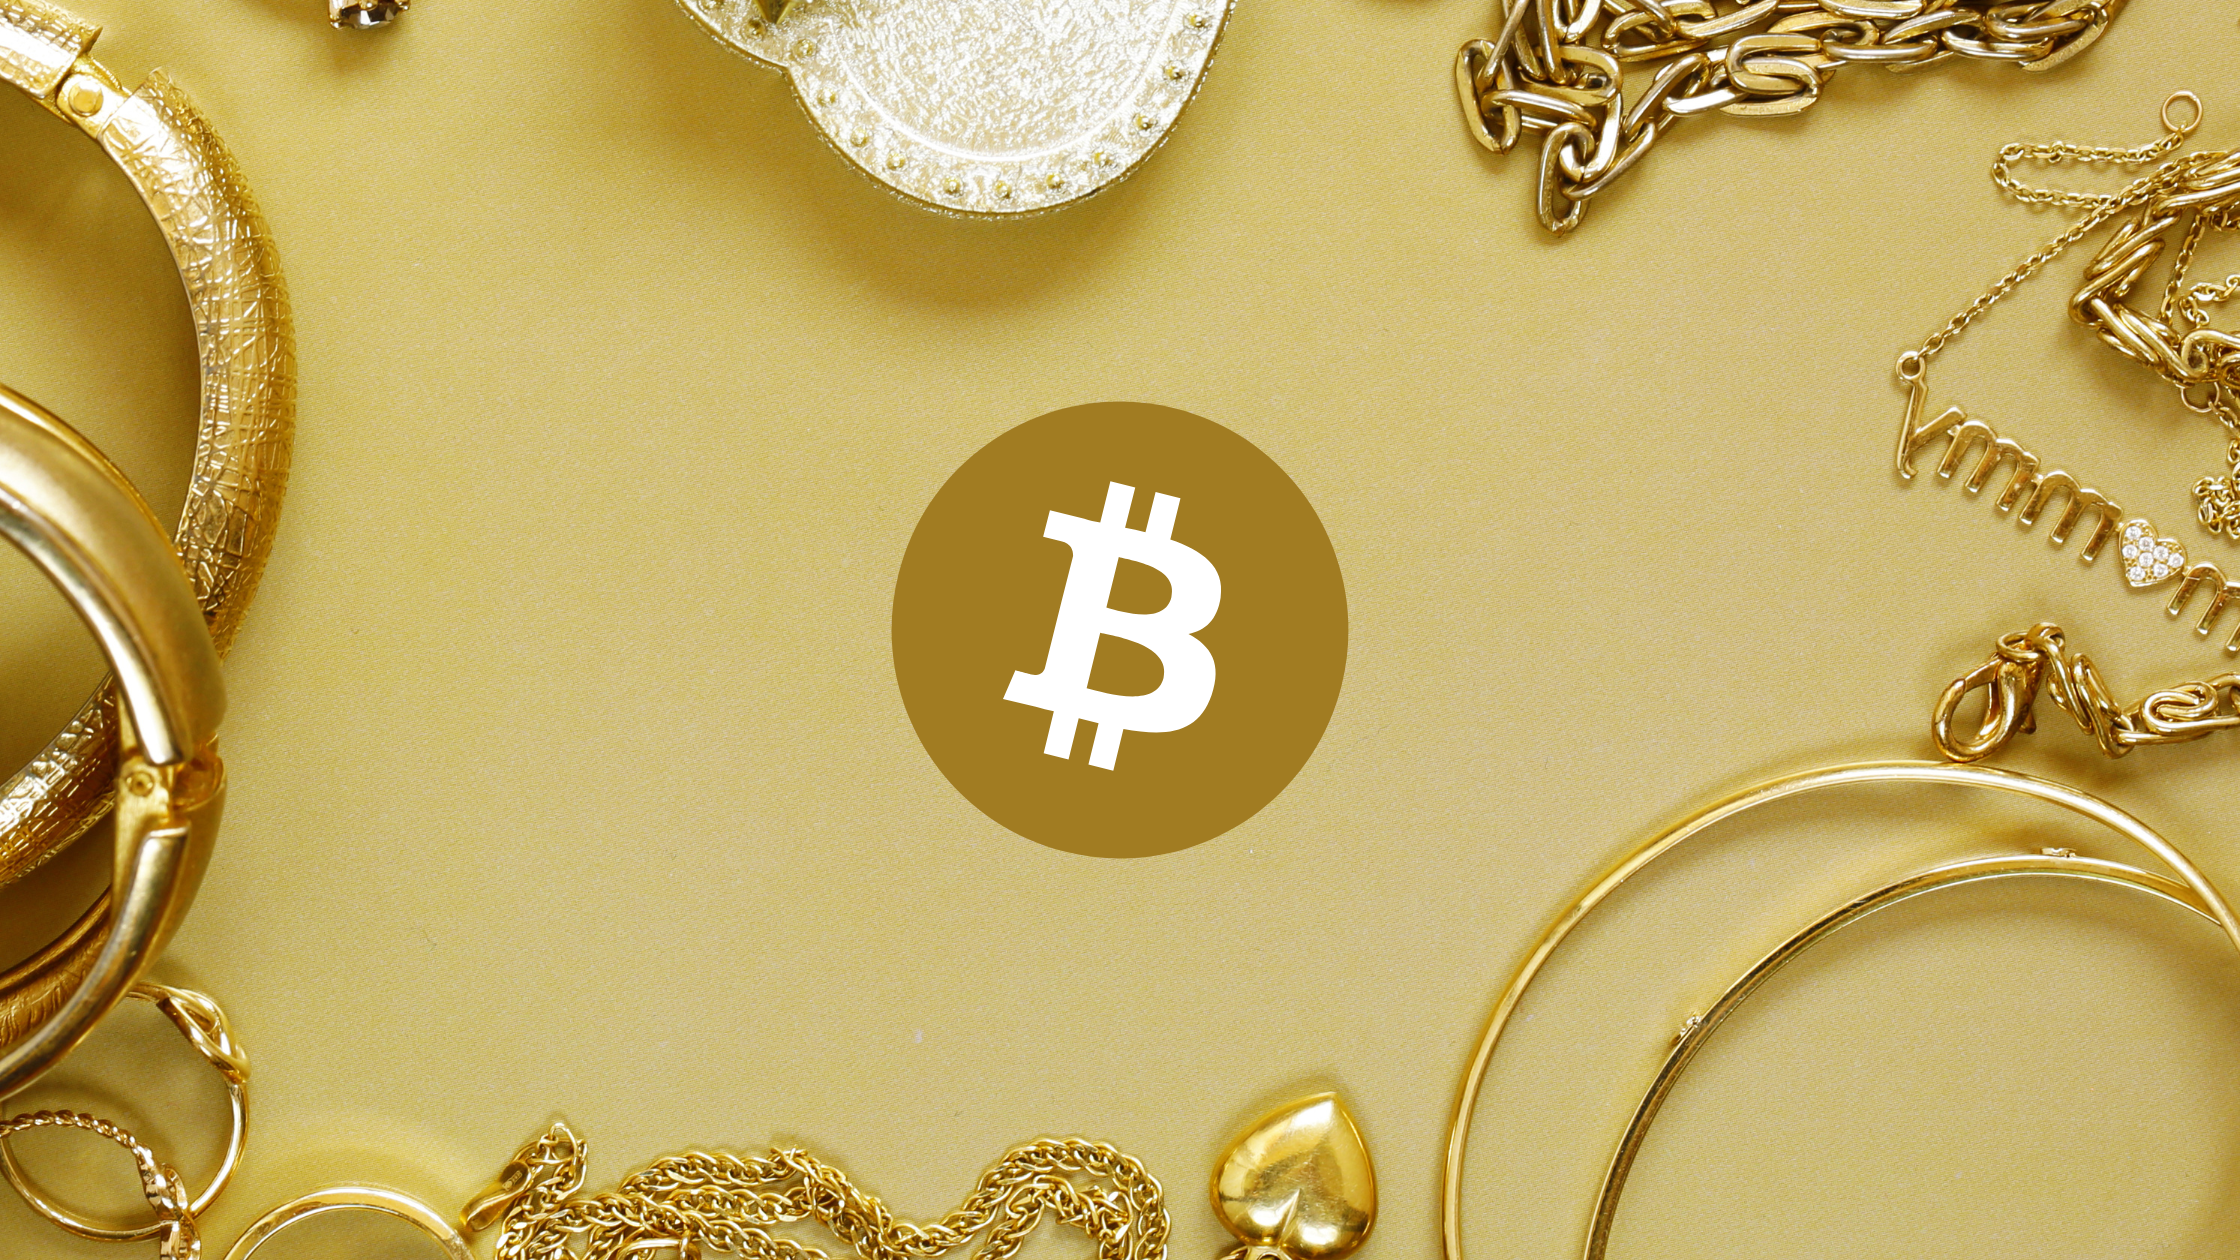 Find out how to Purchase Jewellery and Diamonds with Bitcoin [2022]